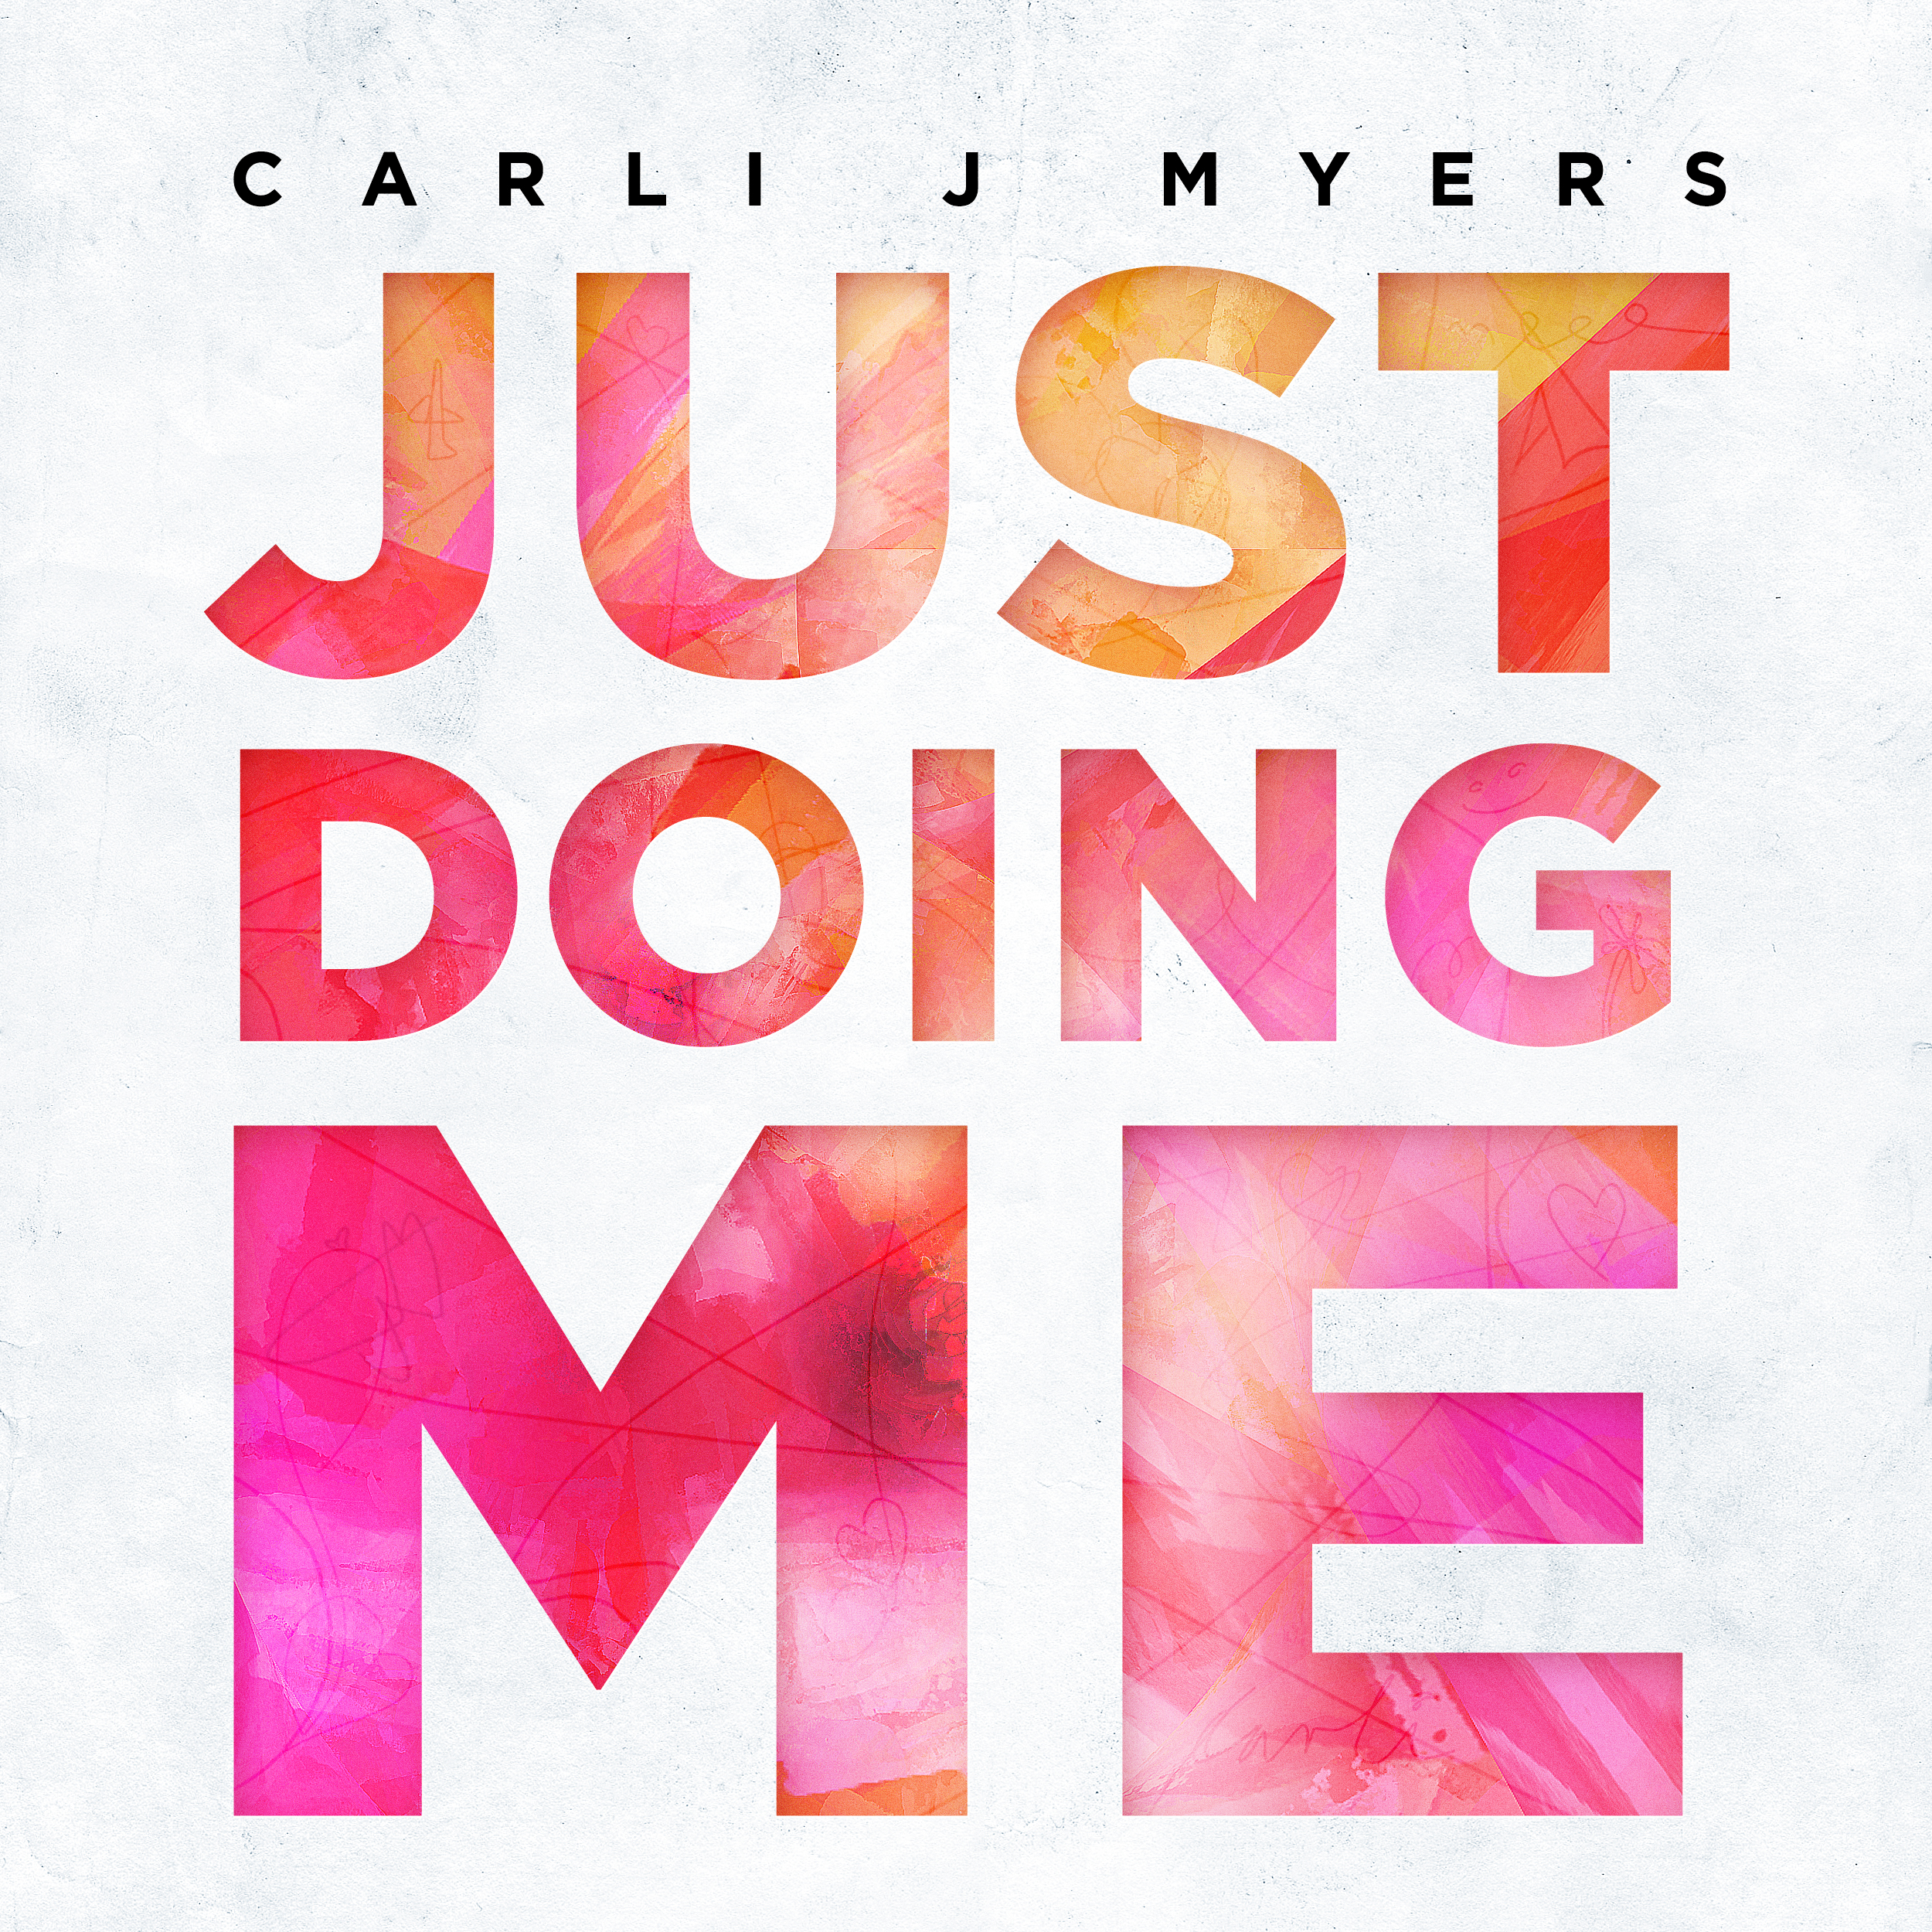 Carli J Myers is back with another banger" Just doing me"